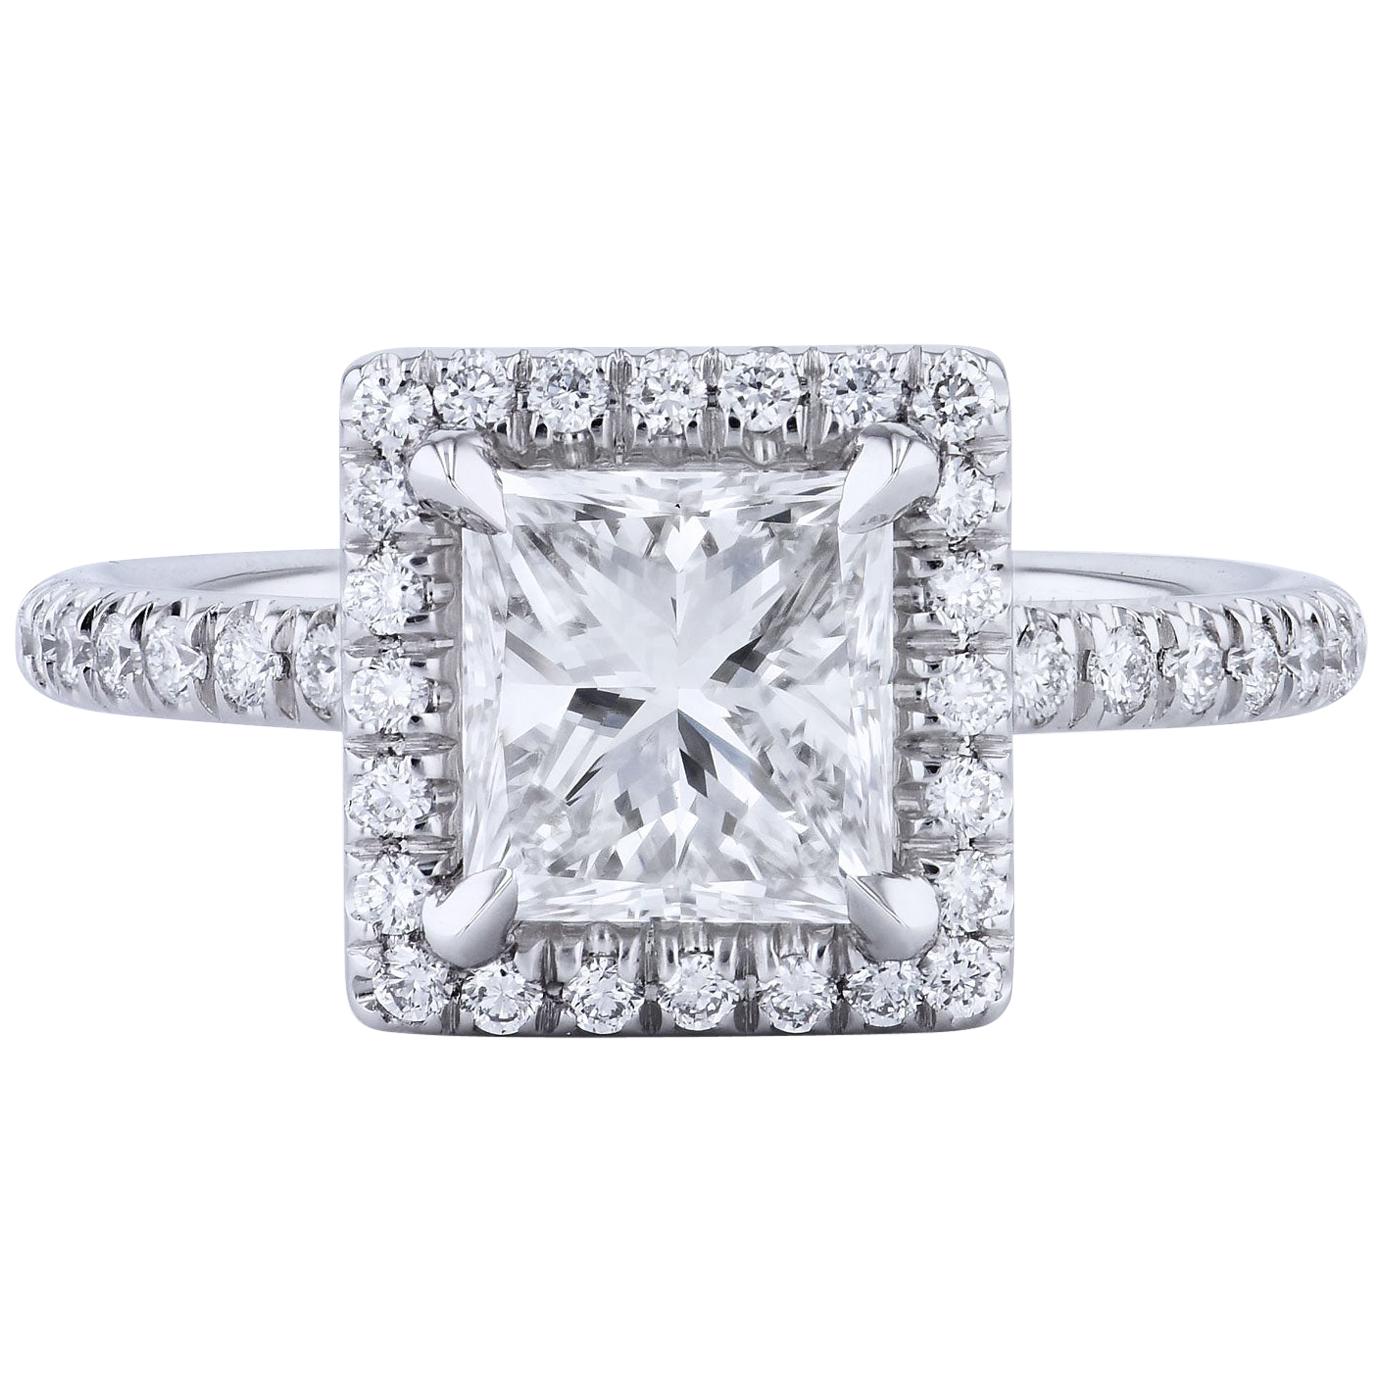 GIA Certified 1.56 Carat Princess Cut Diamond with a Pave Halo Engagement Ring